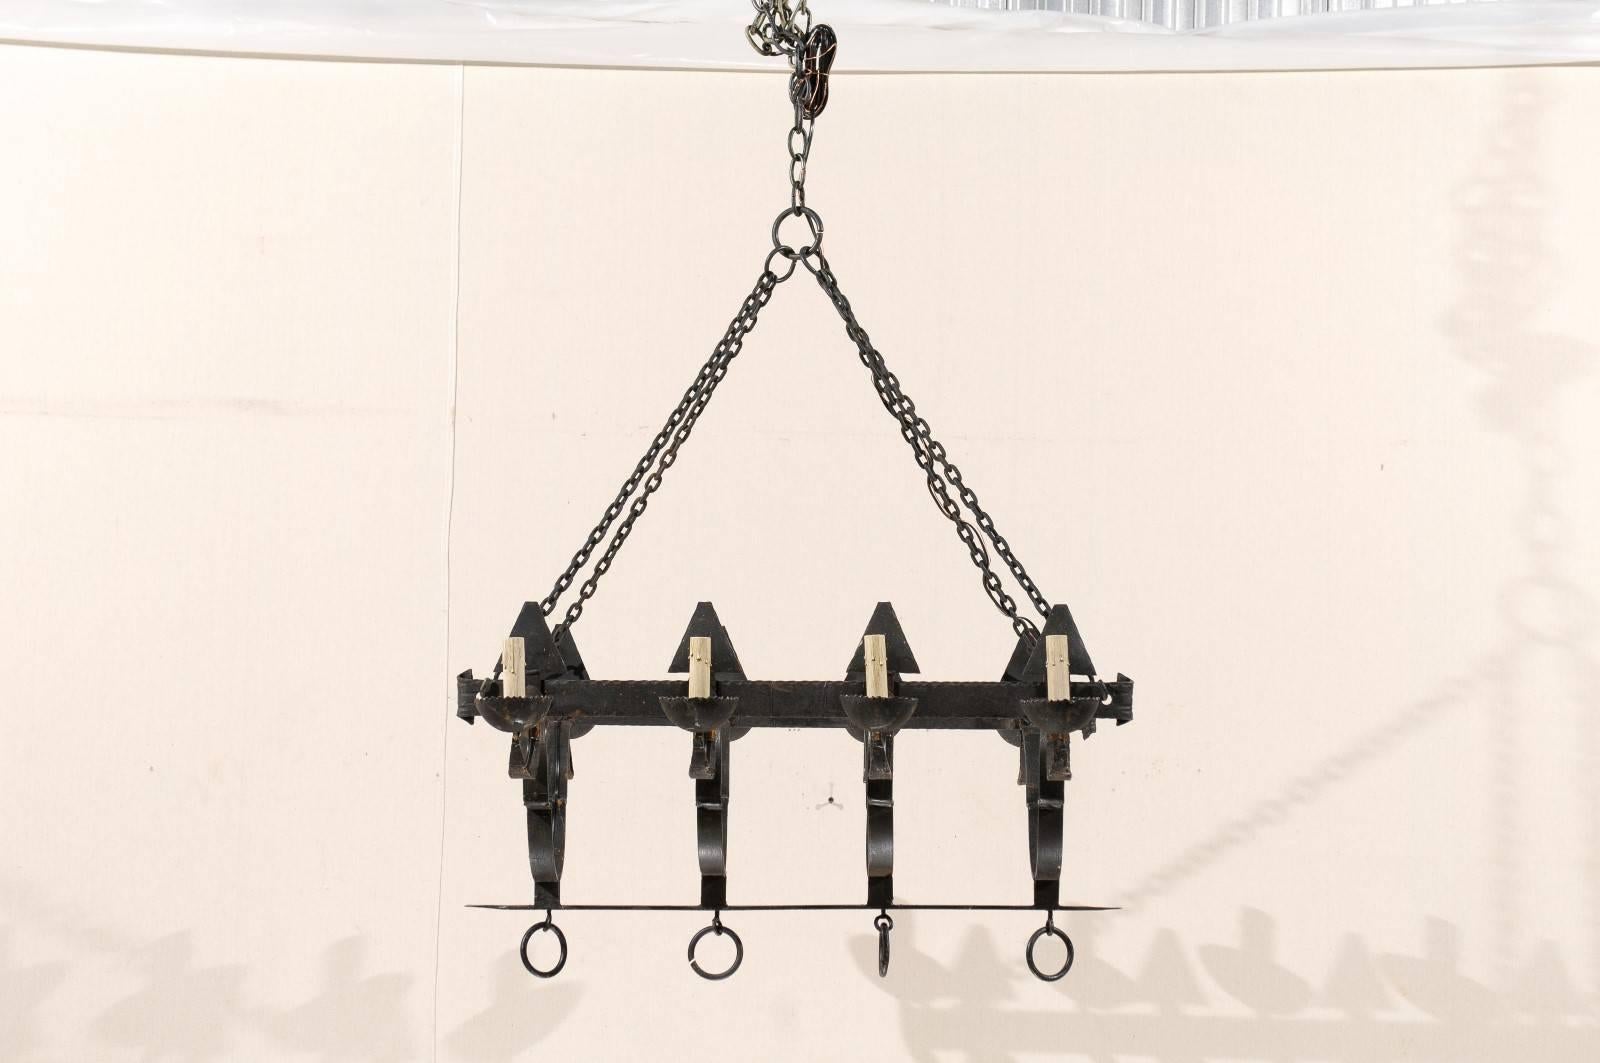 A French rectangular shaped forged iron eight-light chandelier. This French mid-20th century chandelier features two horizontal beams with scrolled ends, each of which support four upward pointing spears mounted along the two longer sides of the